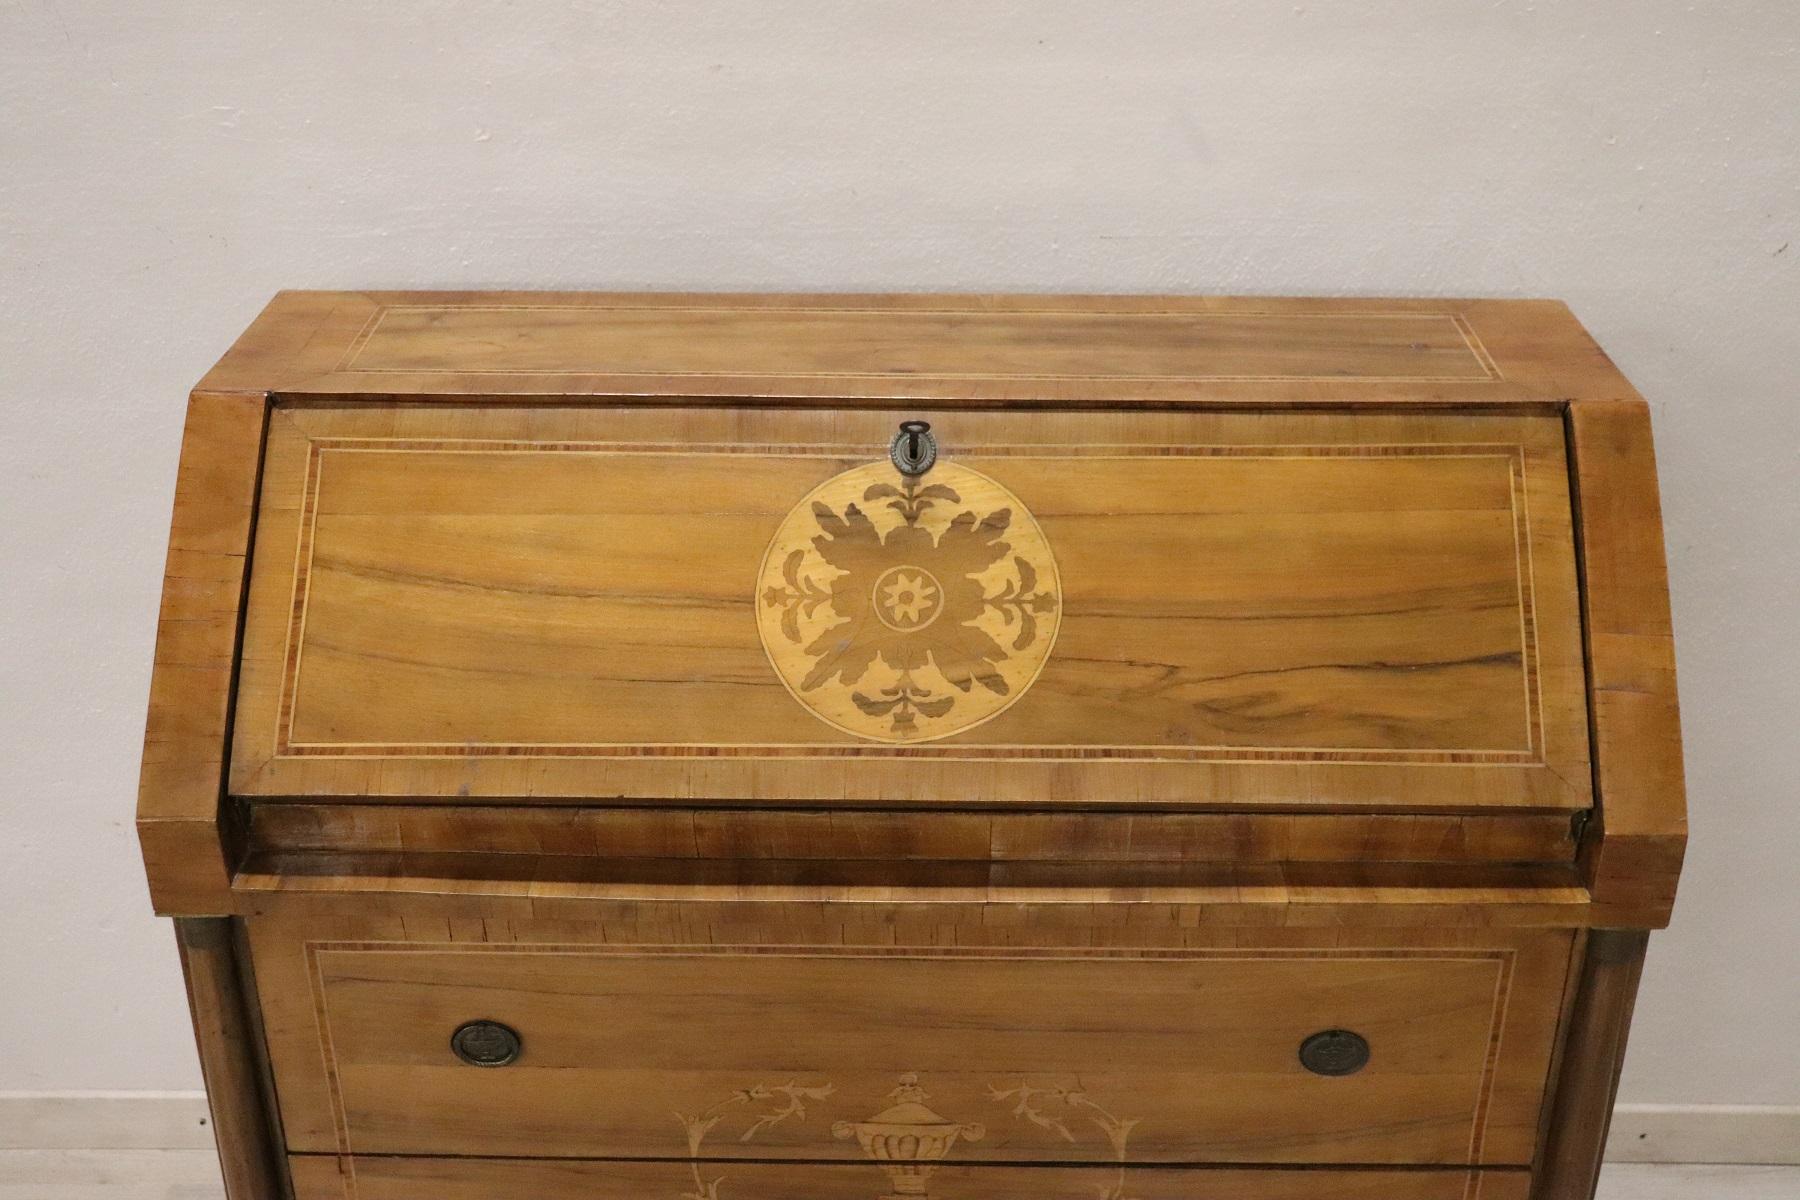 Important elegant chest with secretaire walnut inlaid with wood essences of various types, full Louis XVI style period, 1930s. The inlay work is extremely meticulous. Work possible only by major cabinet makers. We recommend looking at the pictures